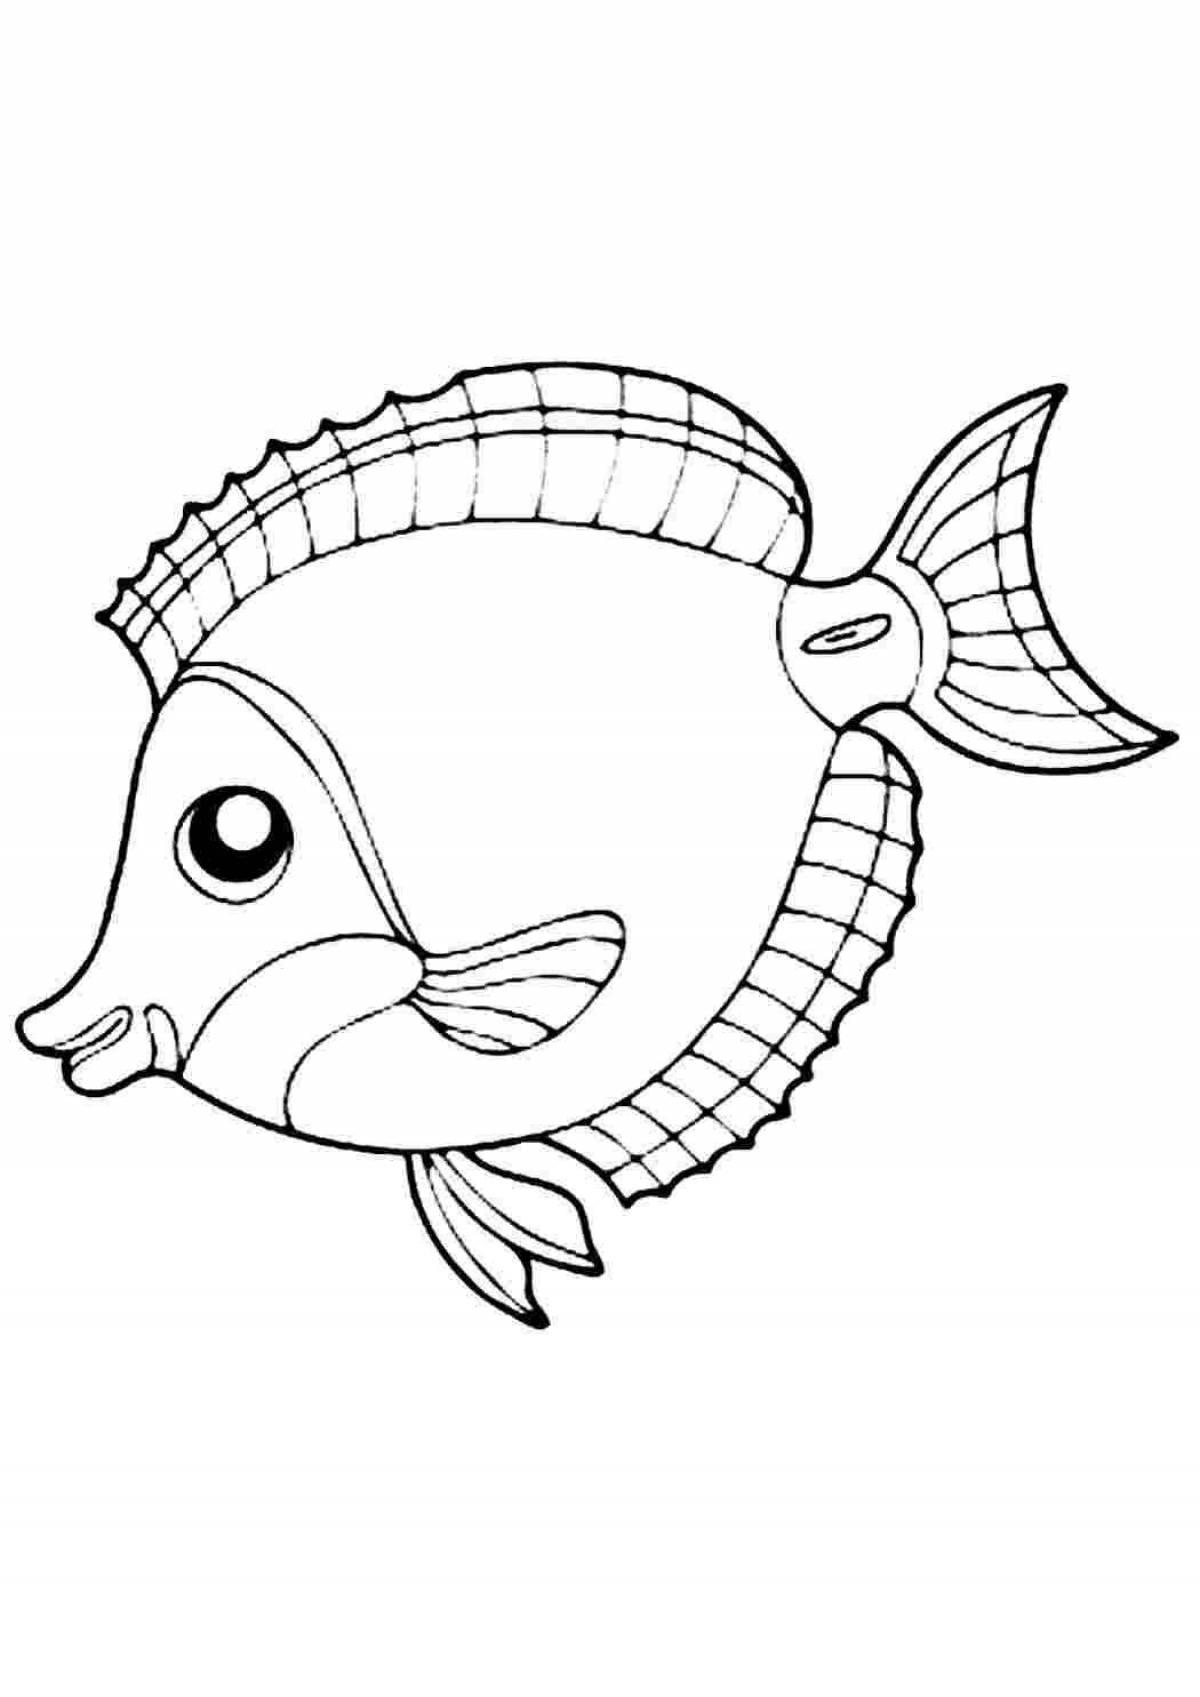 Animated sea fish coloring page